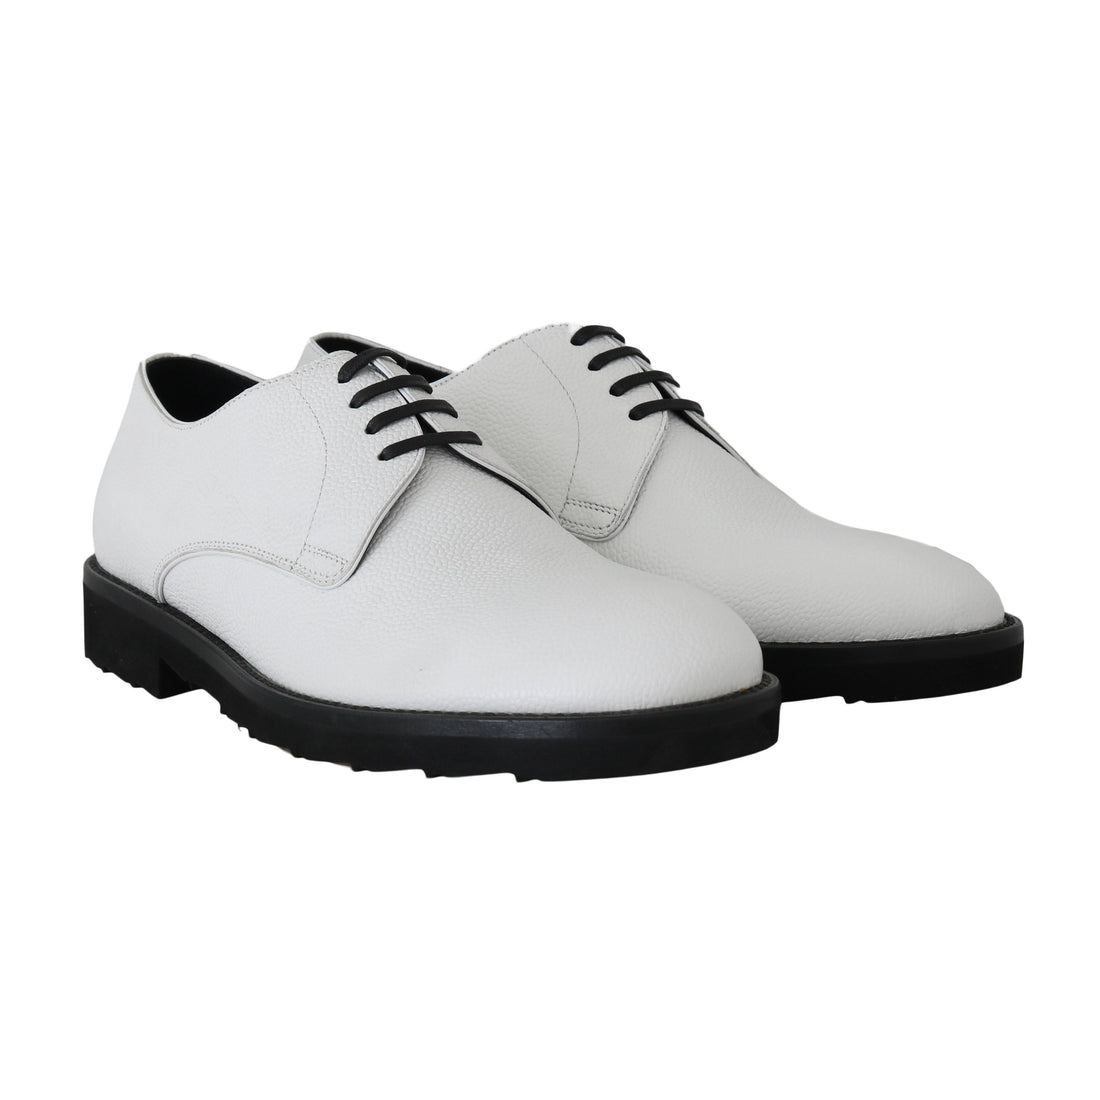 Dolce & Gabbana White Leather Derby Dress Formal Shoes - Paris Deluxe